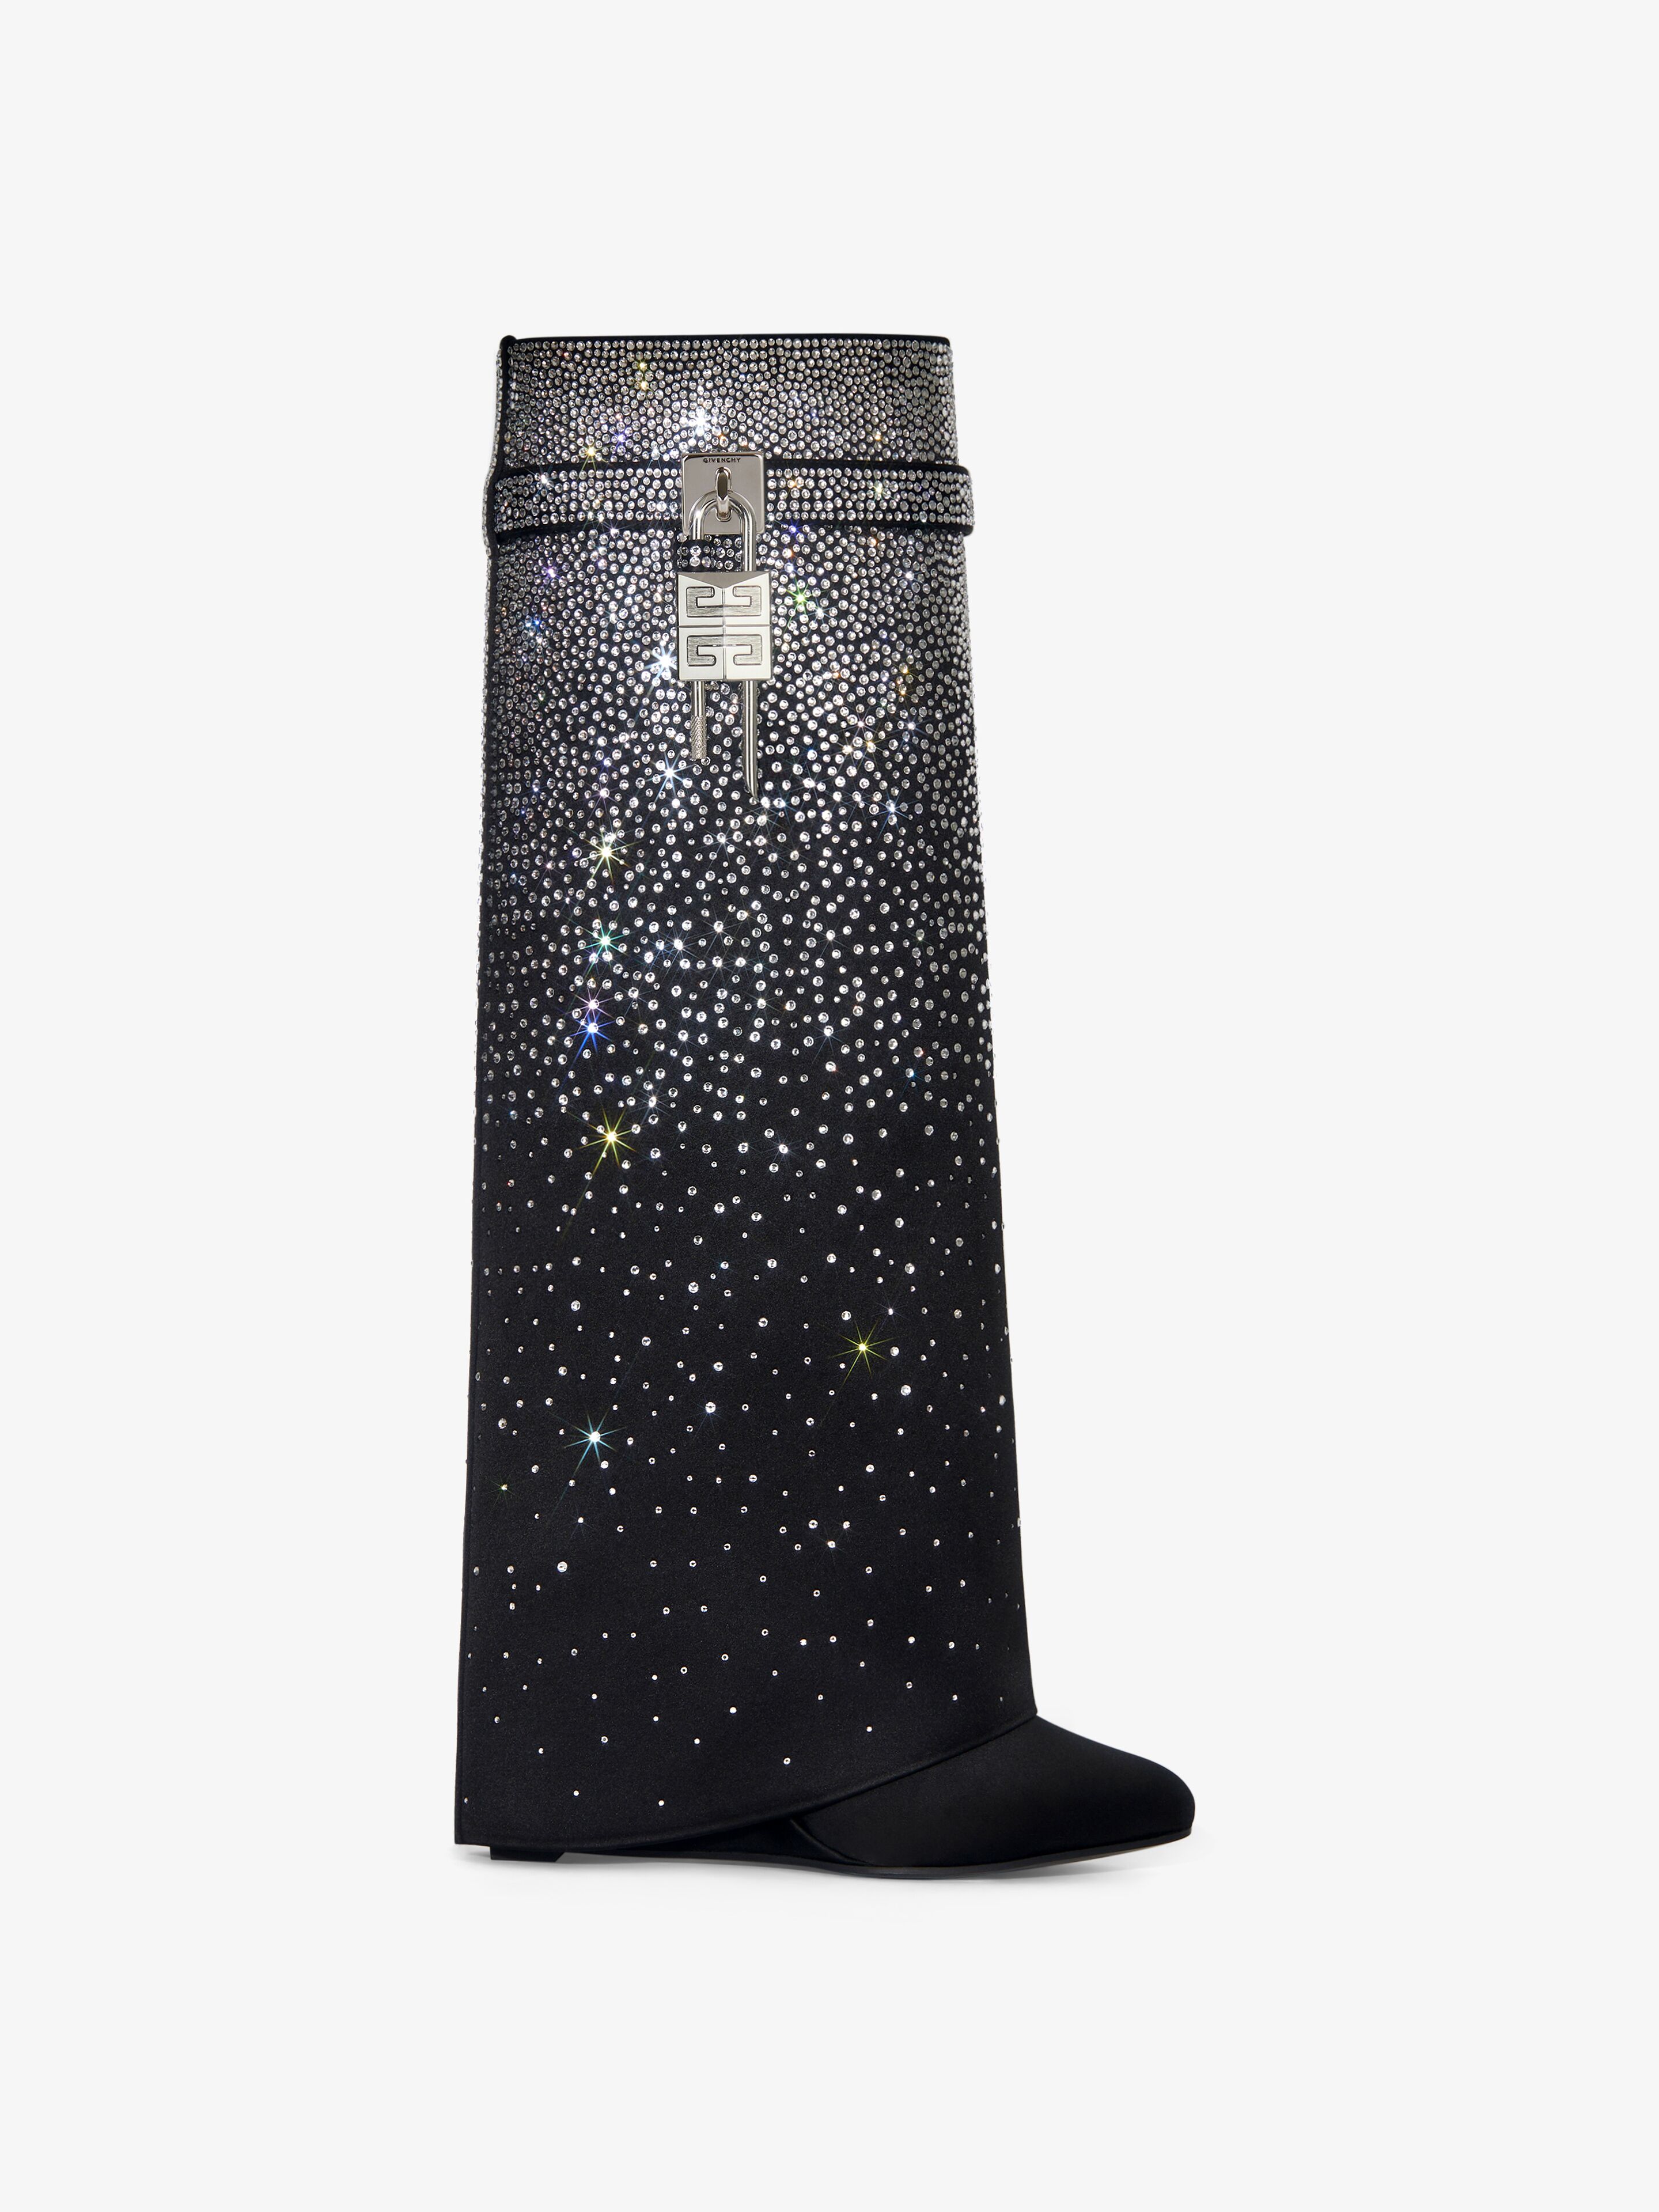 Givenchy Shark Lock Embellished Knee-high Boots In Black/silvery